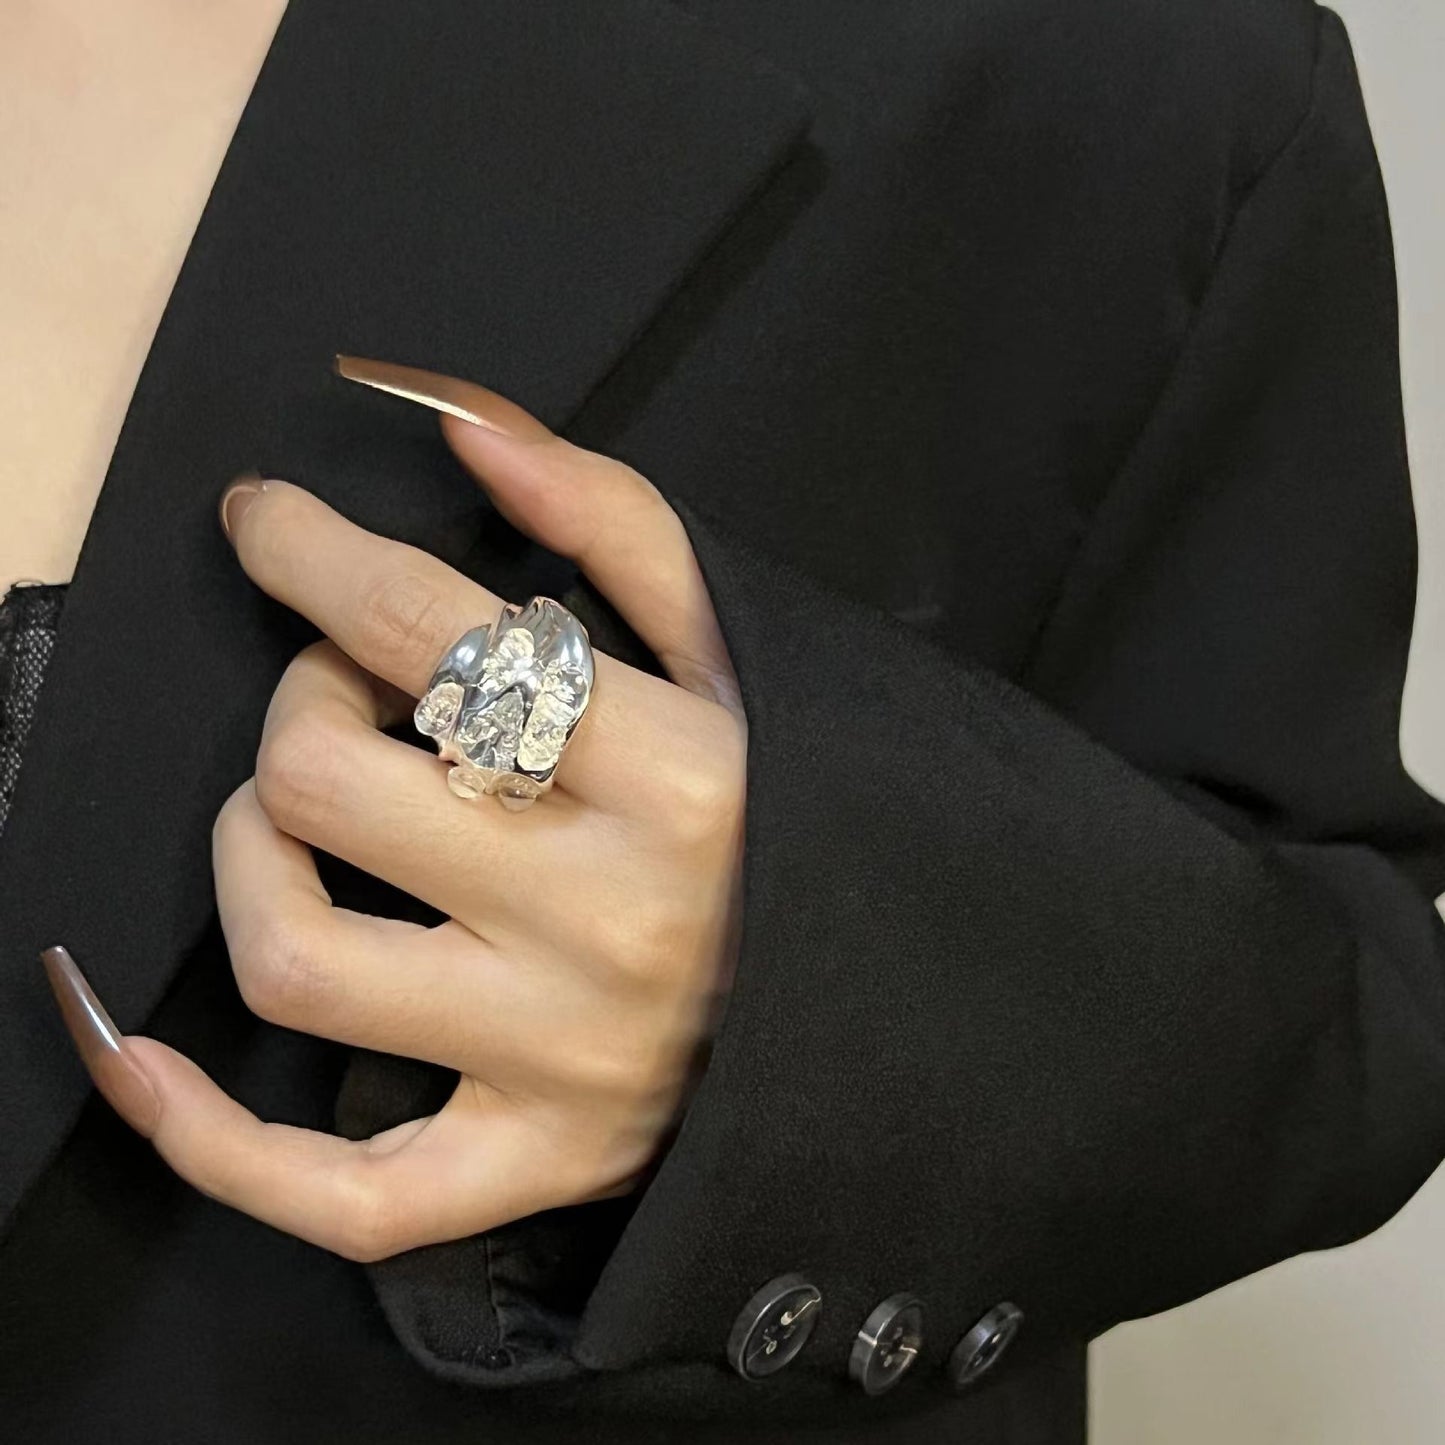 Metal Pleated Irregular Ring for Women's Fashion INS. Cool and Elegant Design for a Small Group. Index Finger Ring Opening